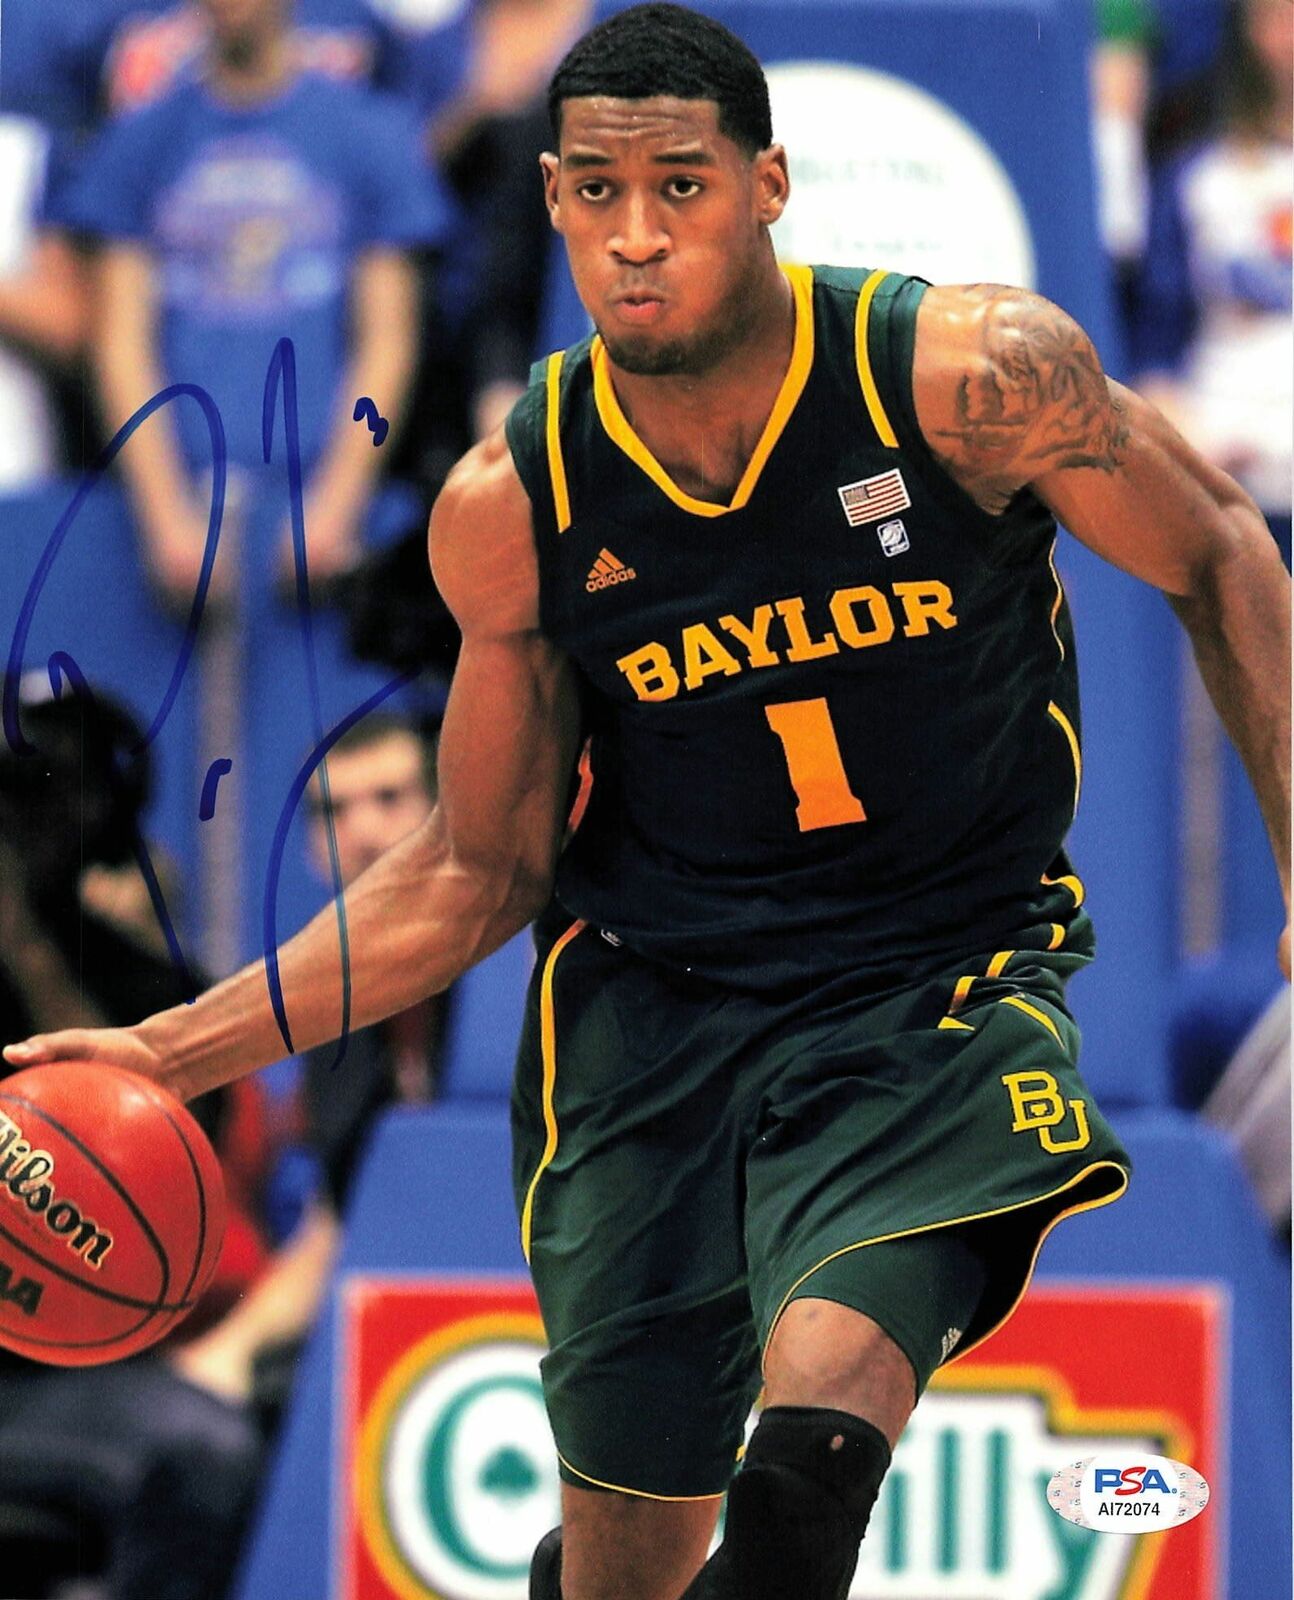 PERRY JONES signed 8x10 Photo Poster painting PSA/DNA Baylor Autographed